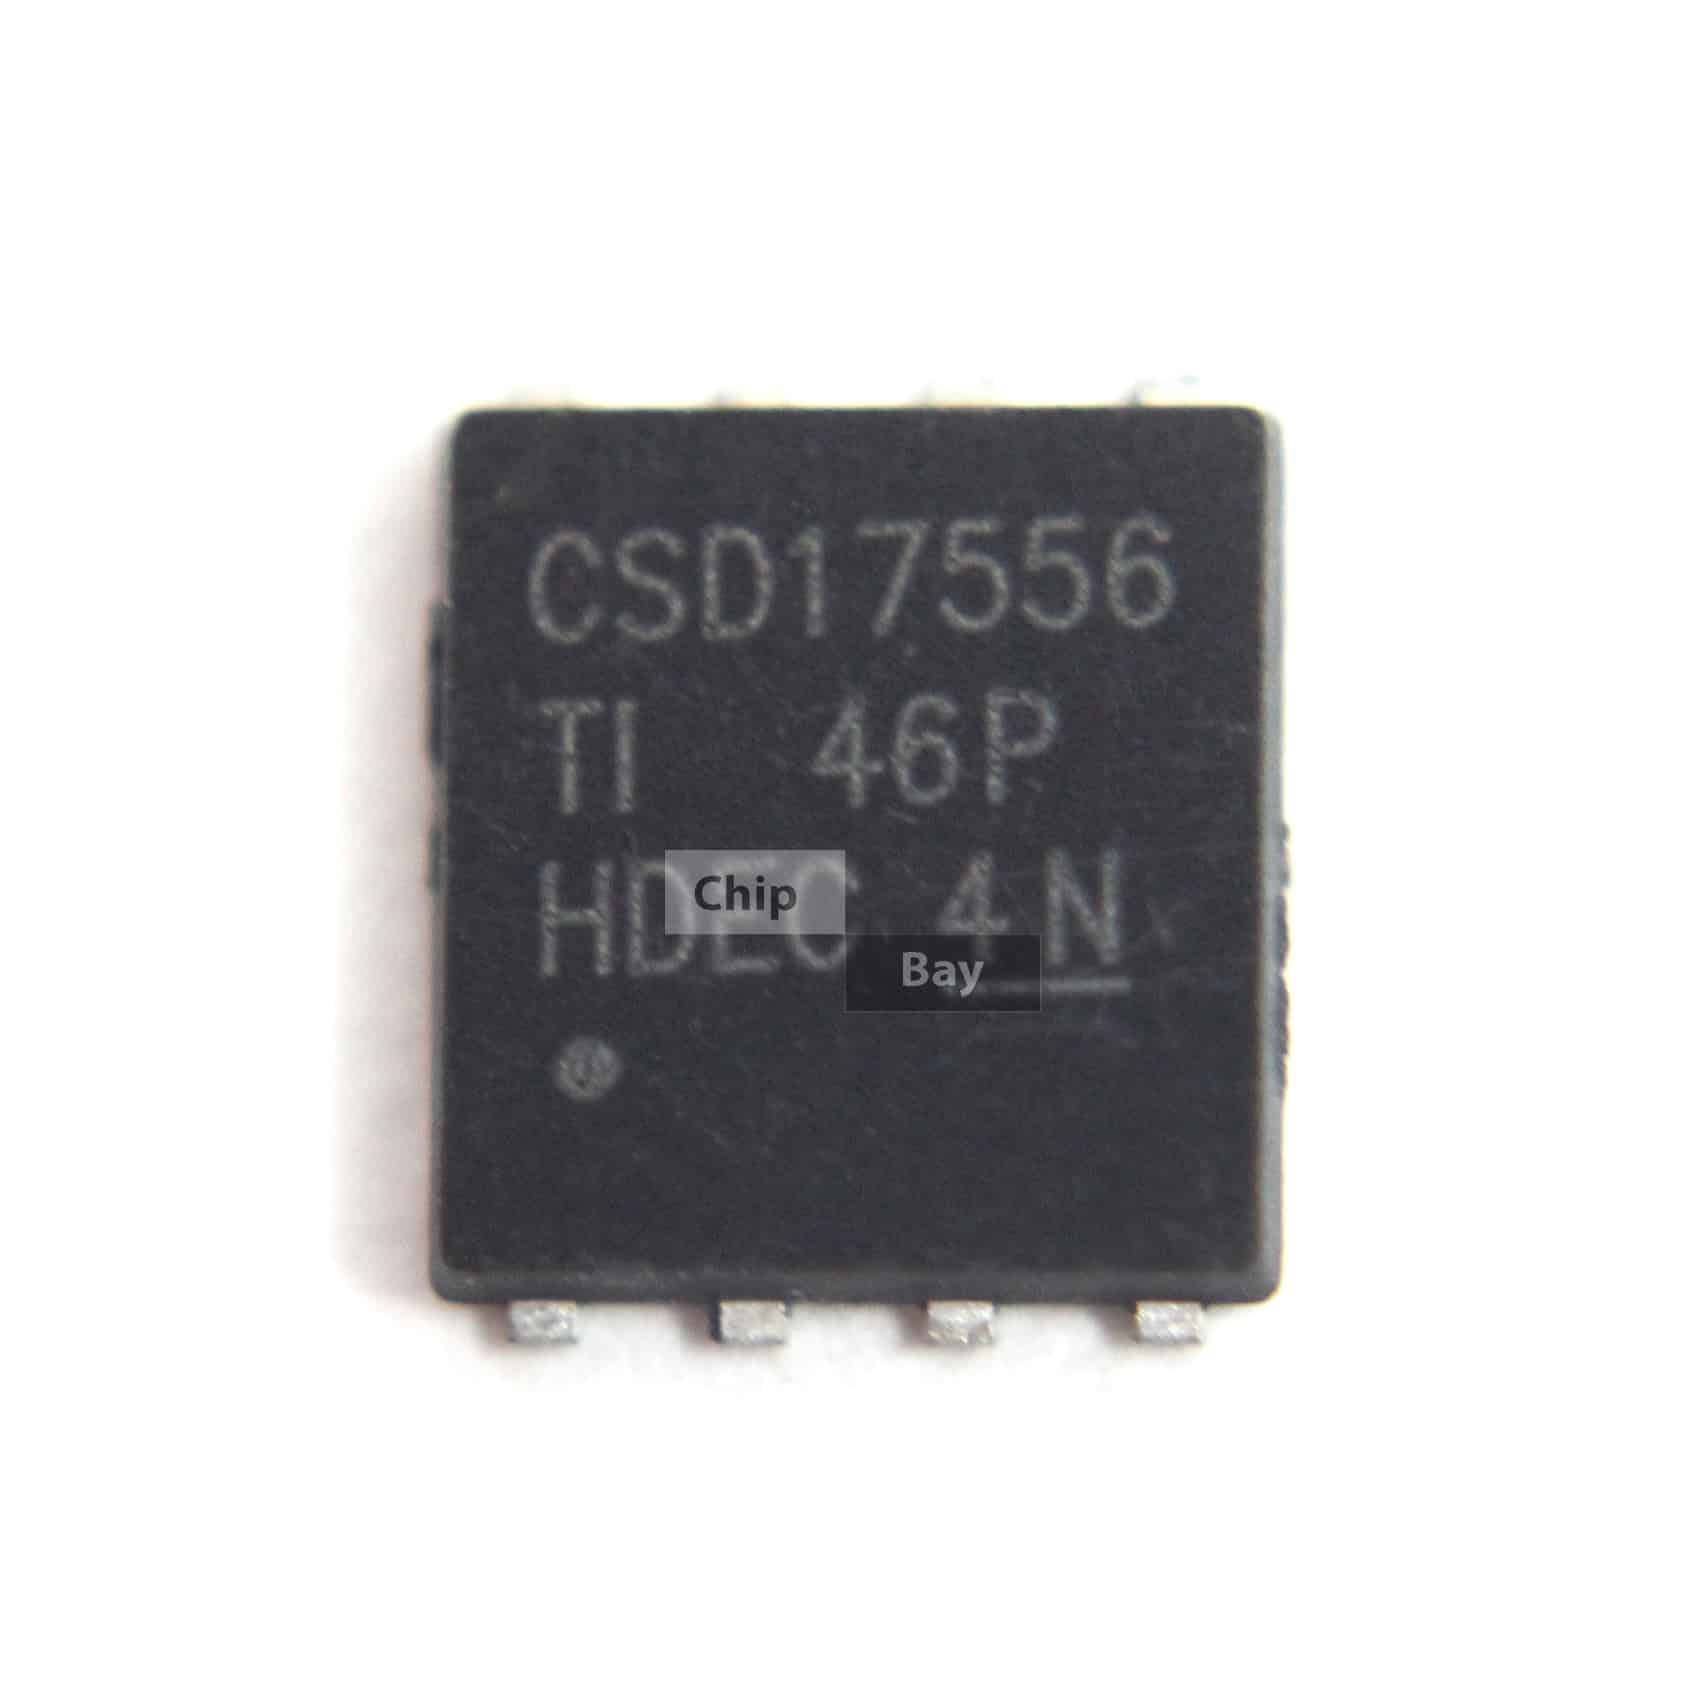 2x Texas Instruments CSD17556 30-V N-Channel nexfet Power MOSFET